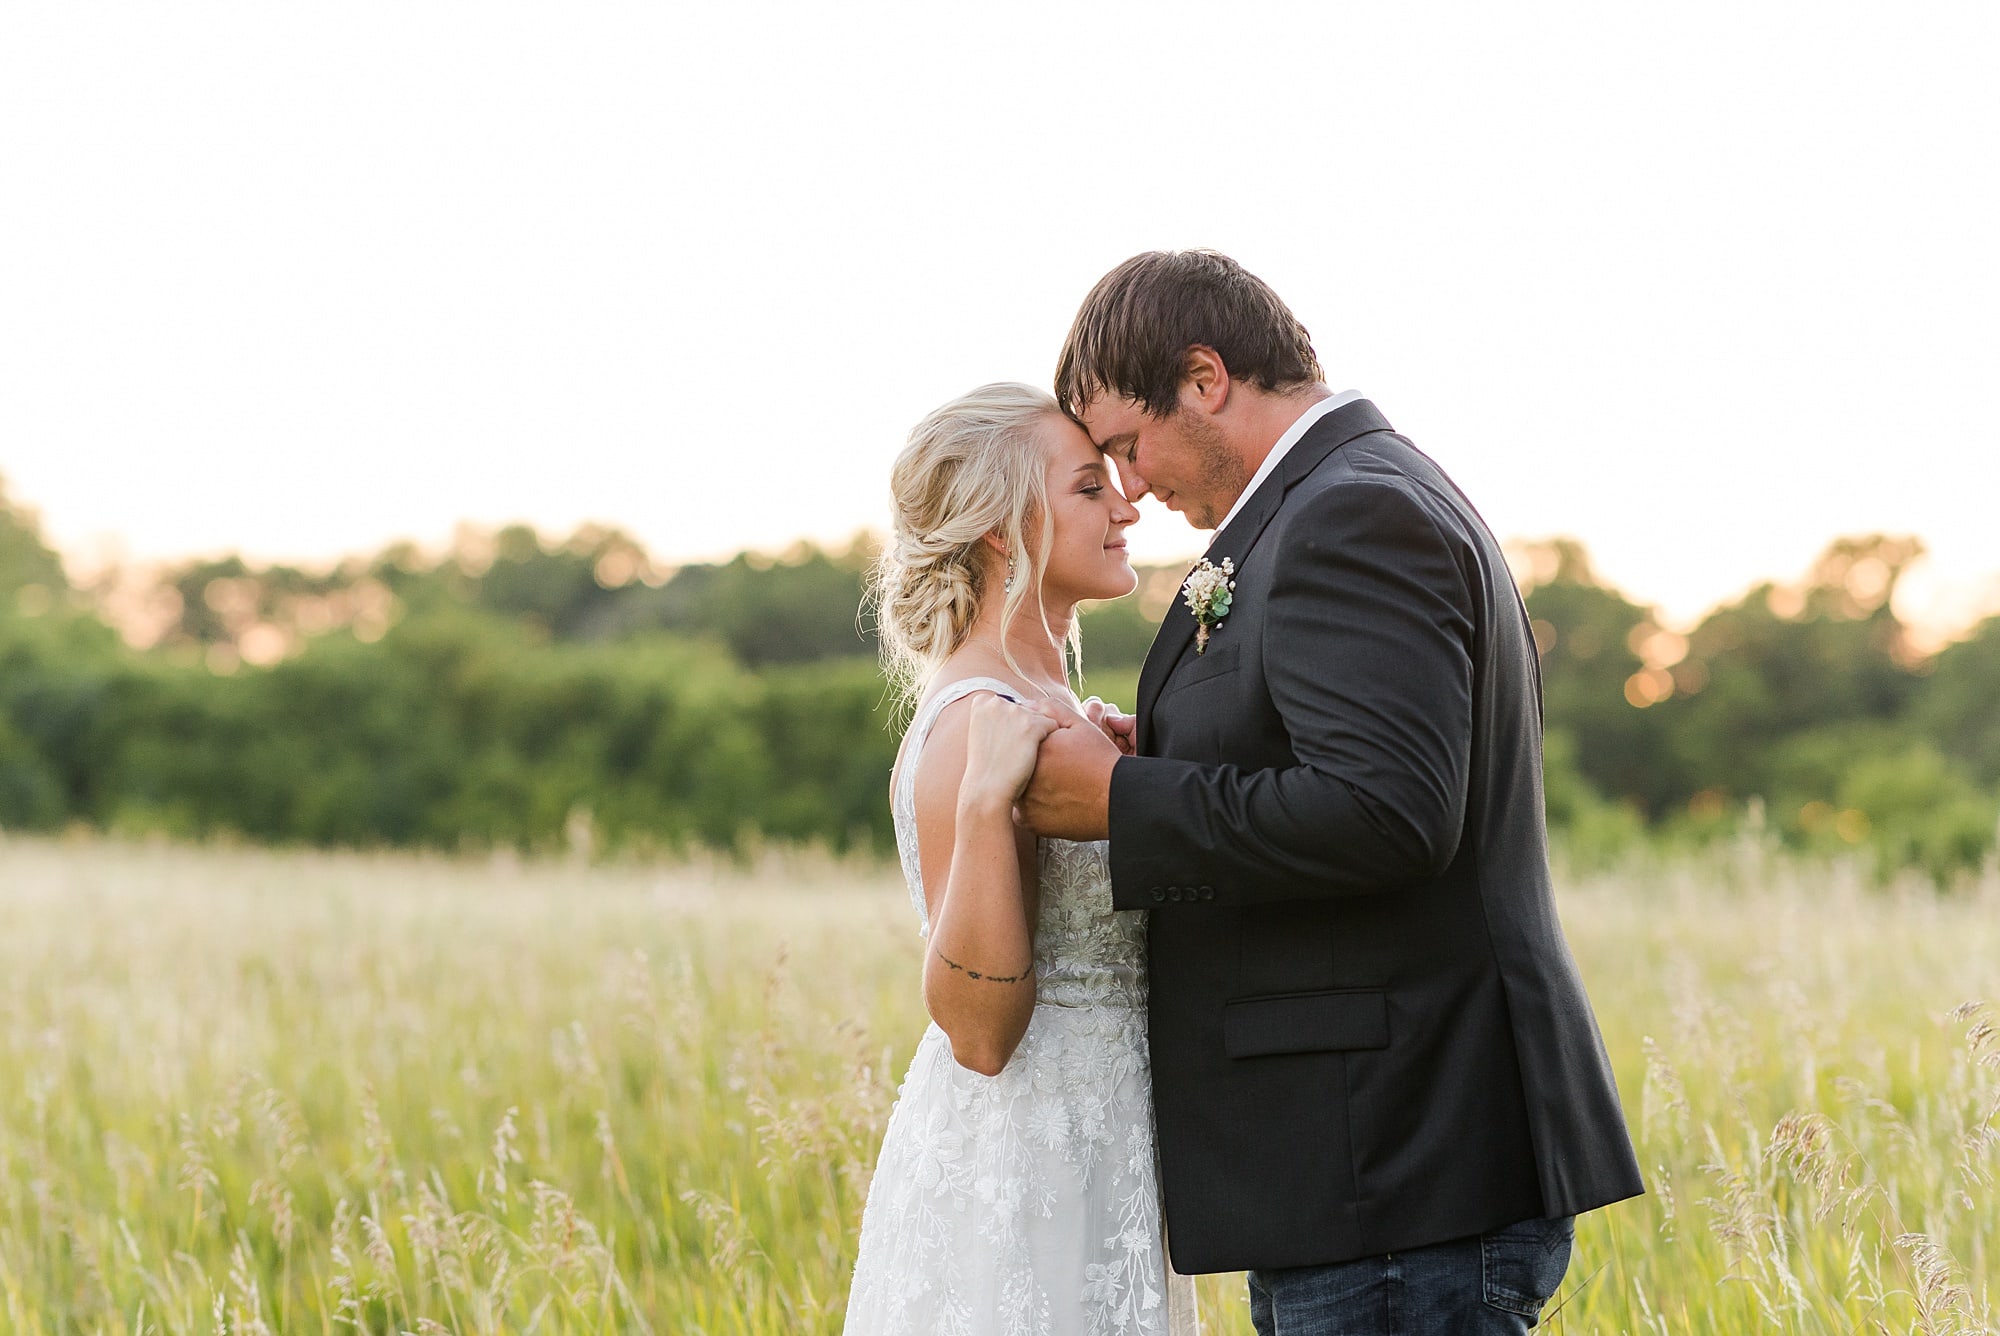 Bride and Groom hold hands and touch foreheads during sunset at Rustic Oaks